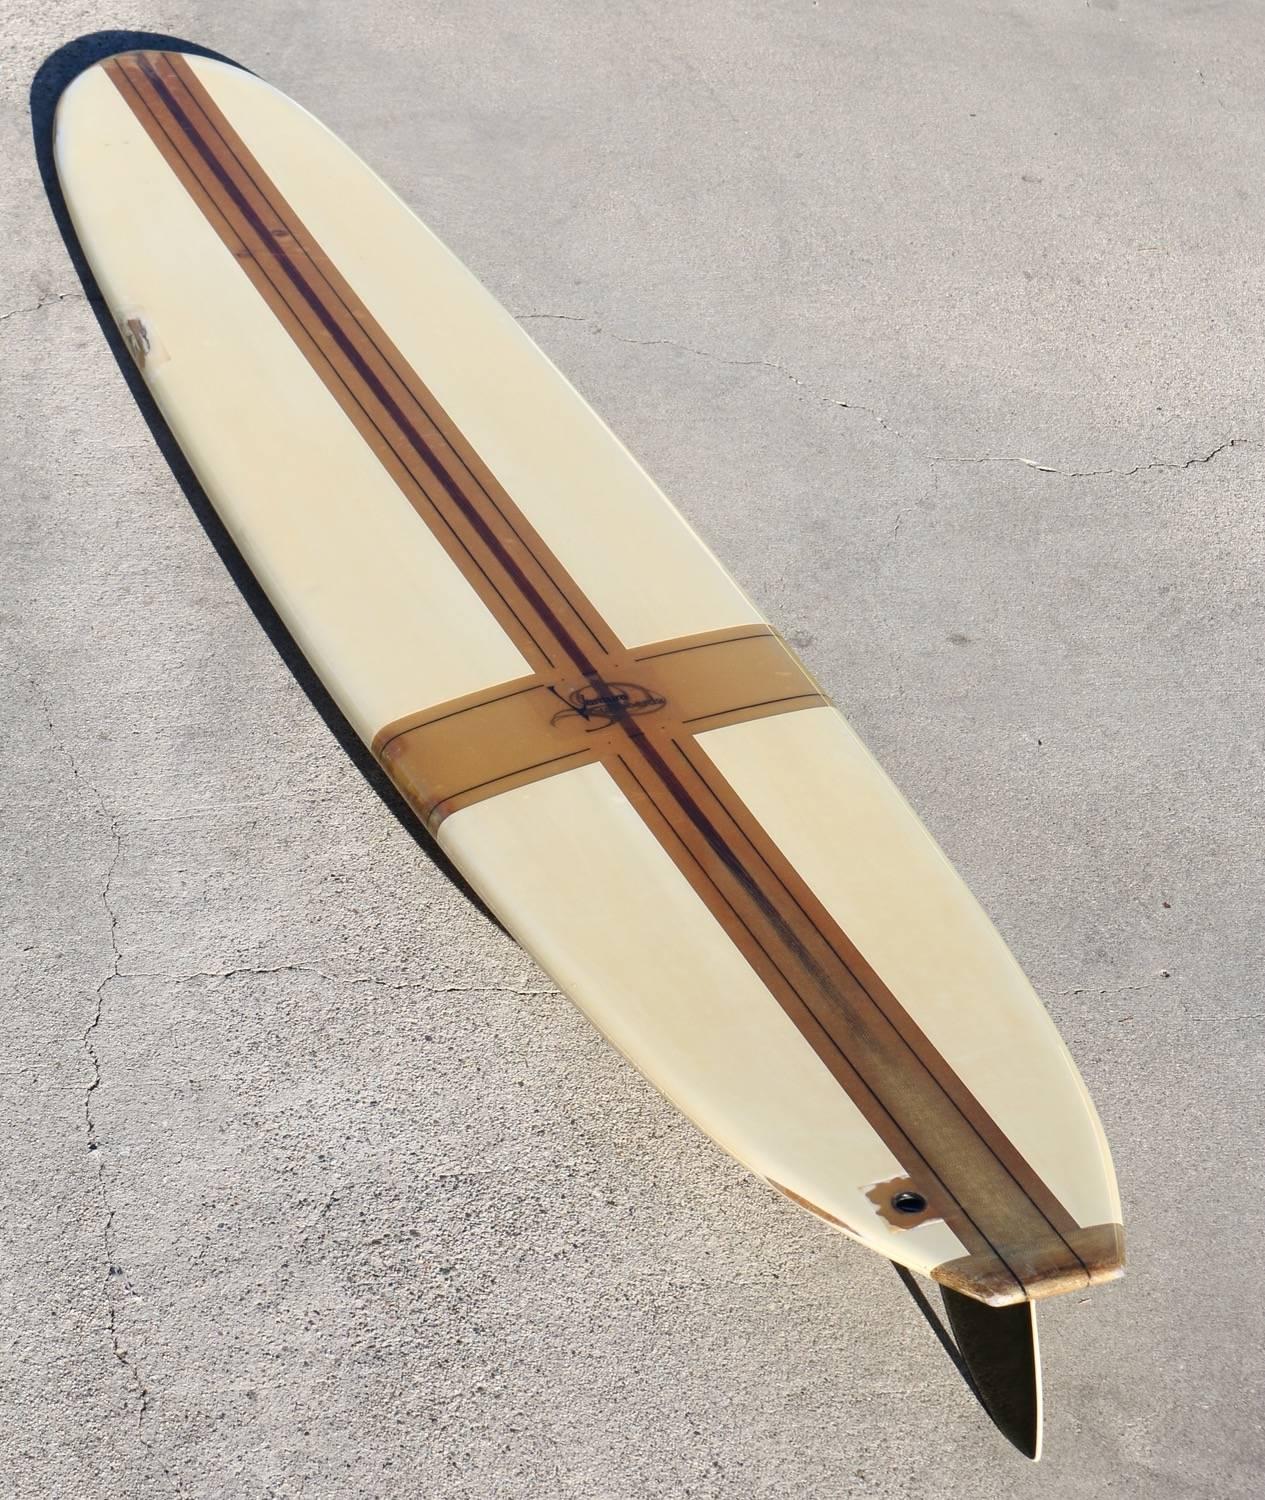 Attractive 1960s longboard in good condition with fabulous patina and old-school style.
A few dings, scrapes and paint chips but nothing that detracts from its overall beauty.

Surfing Cowboys® is recognized as the go-to source for California